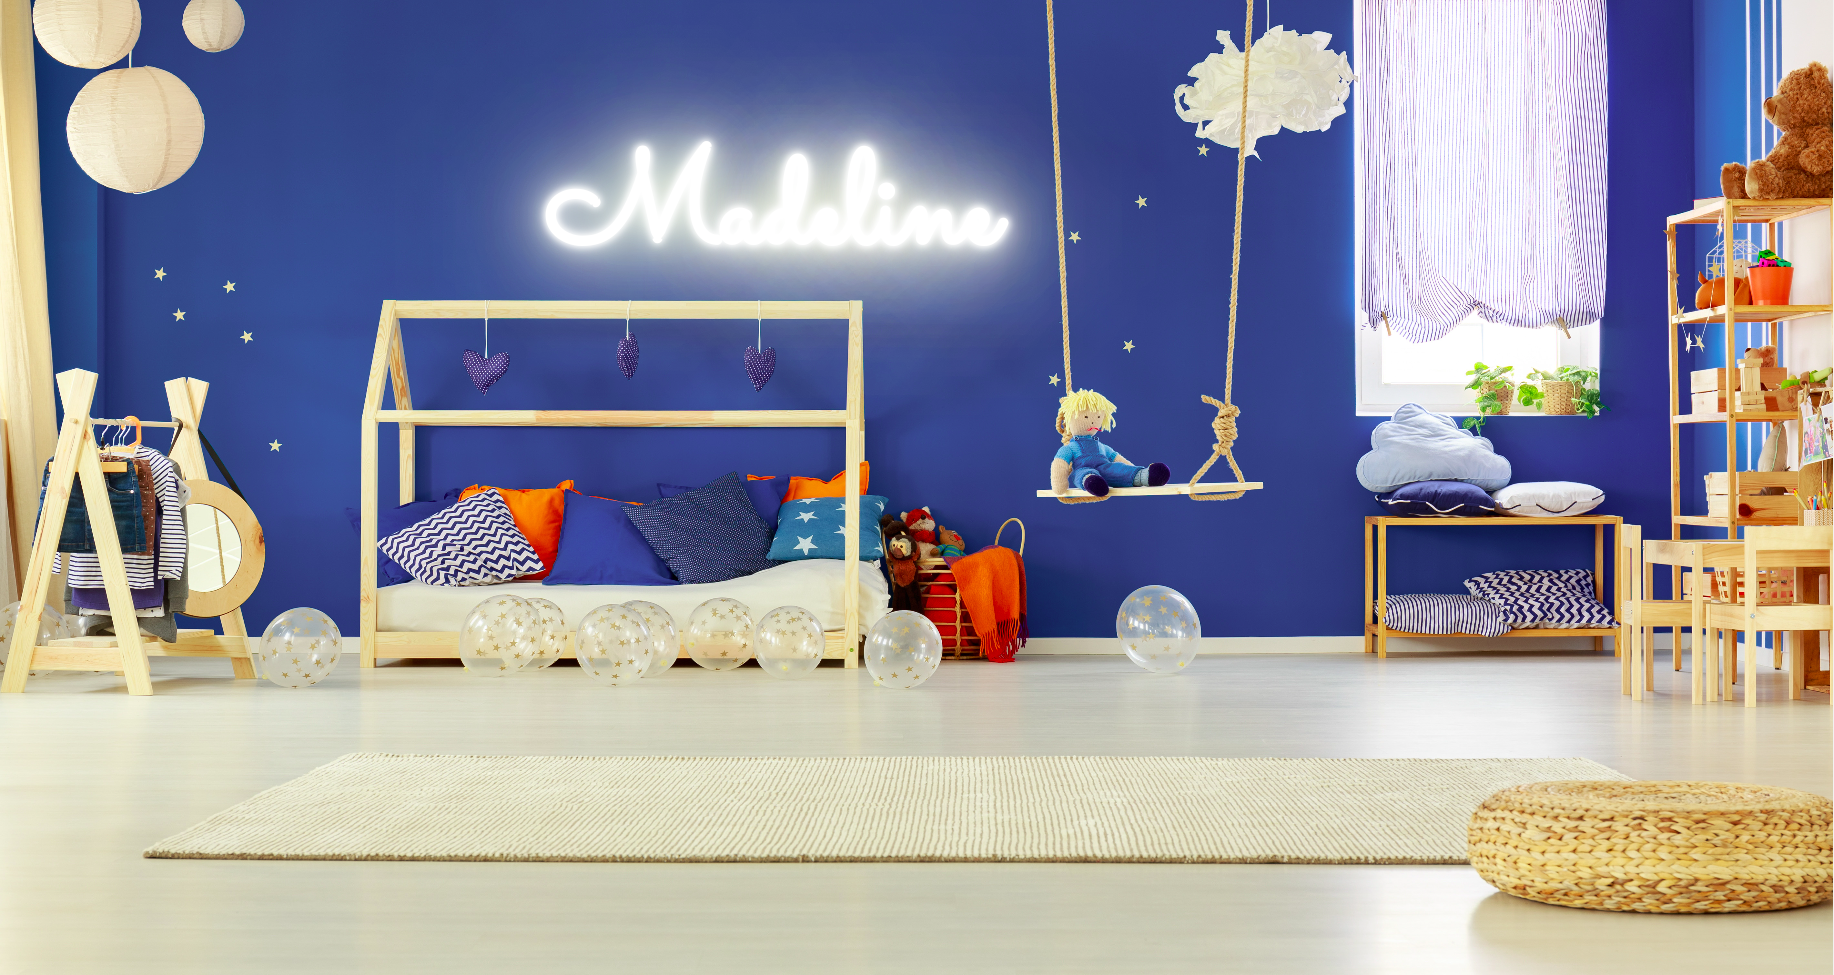 "Madeline" Baby Name LED Neon Sign